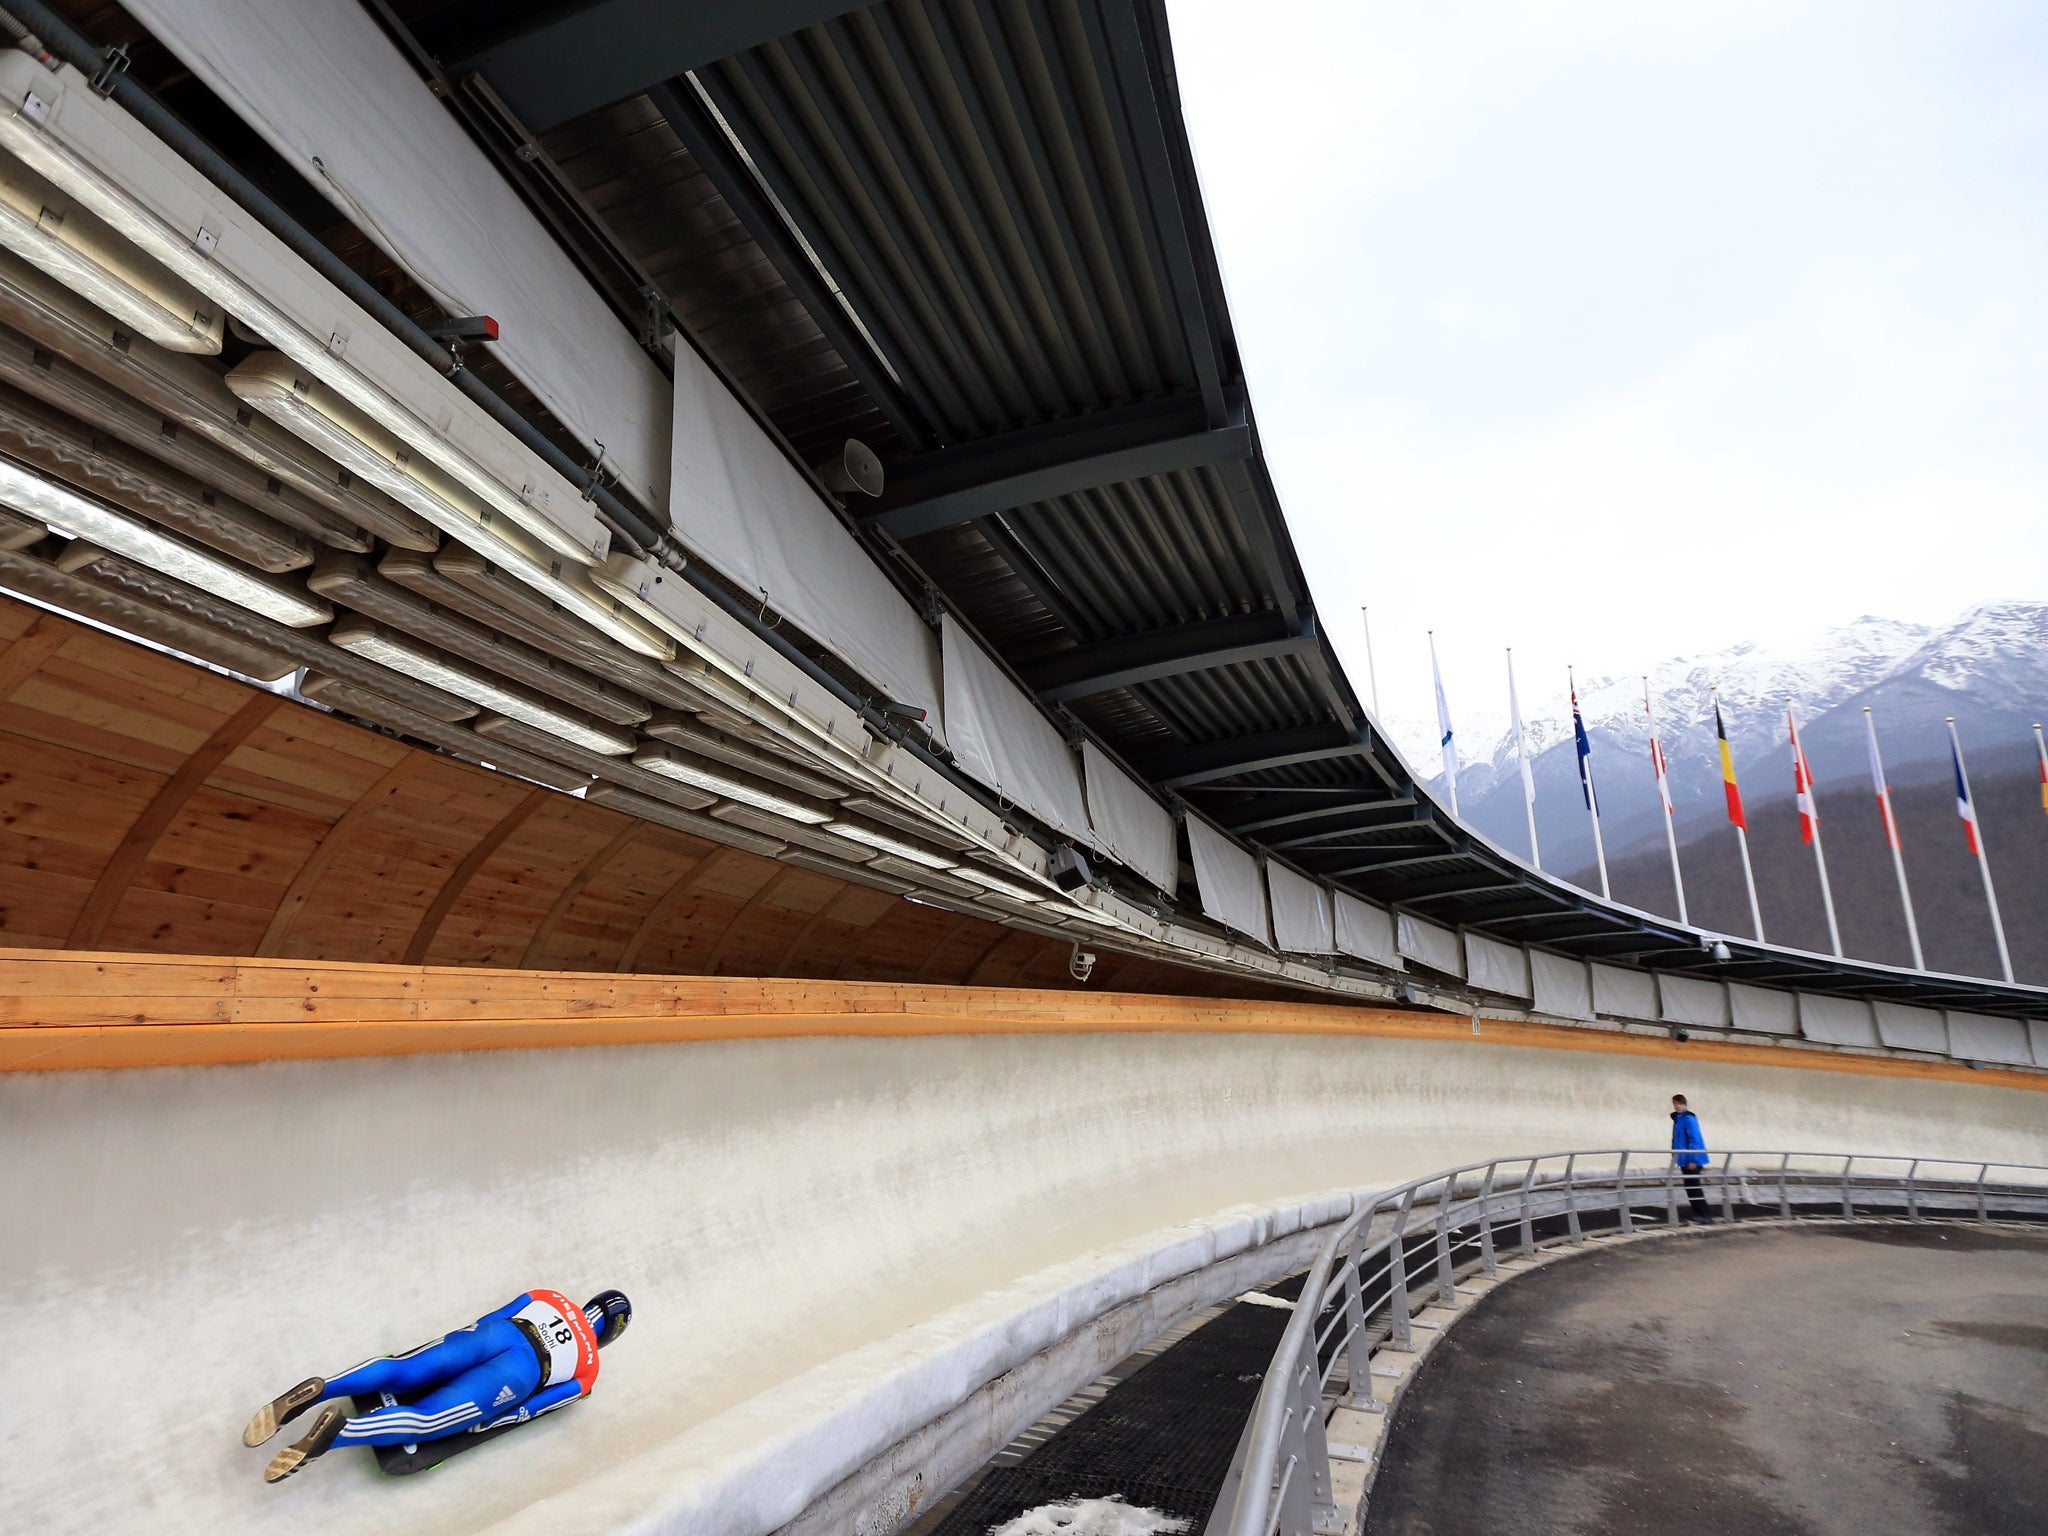 A general view of the track as a Skeleton rider goes down the slope at the Sanki Sliding Center